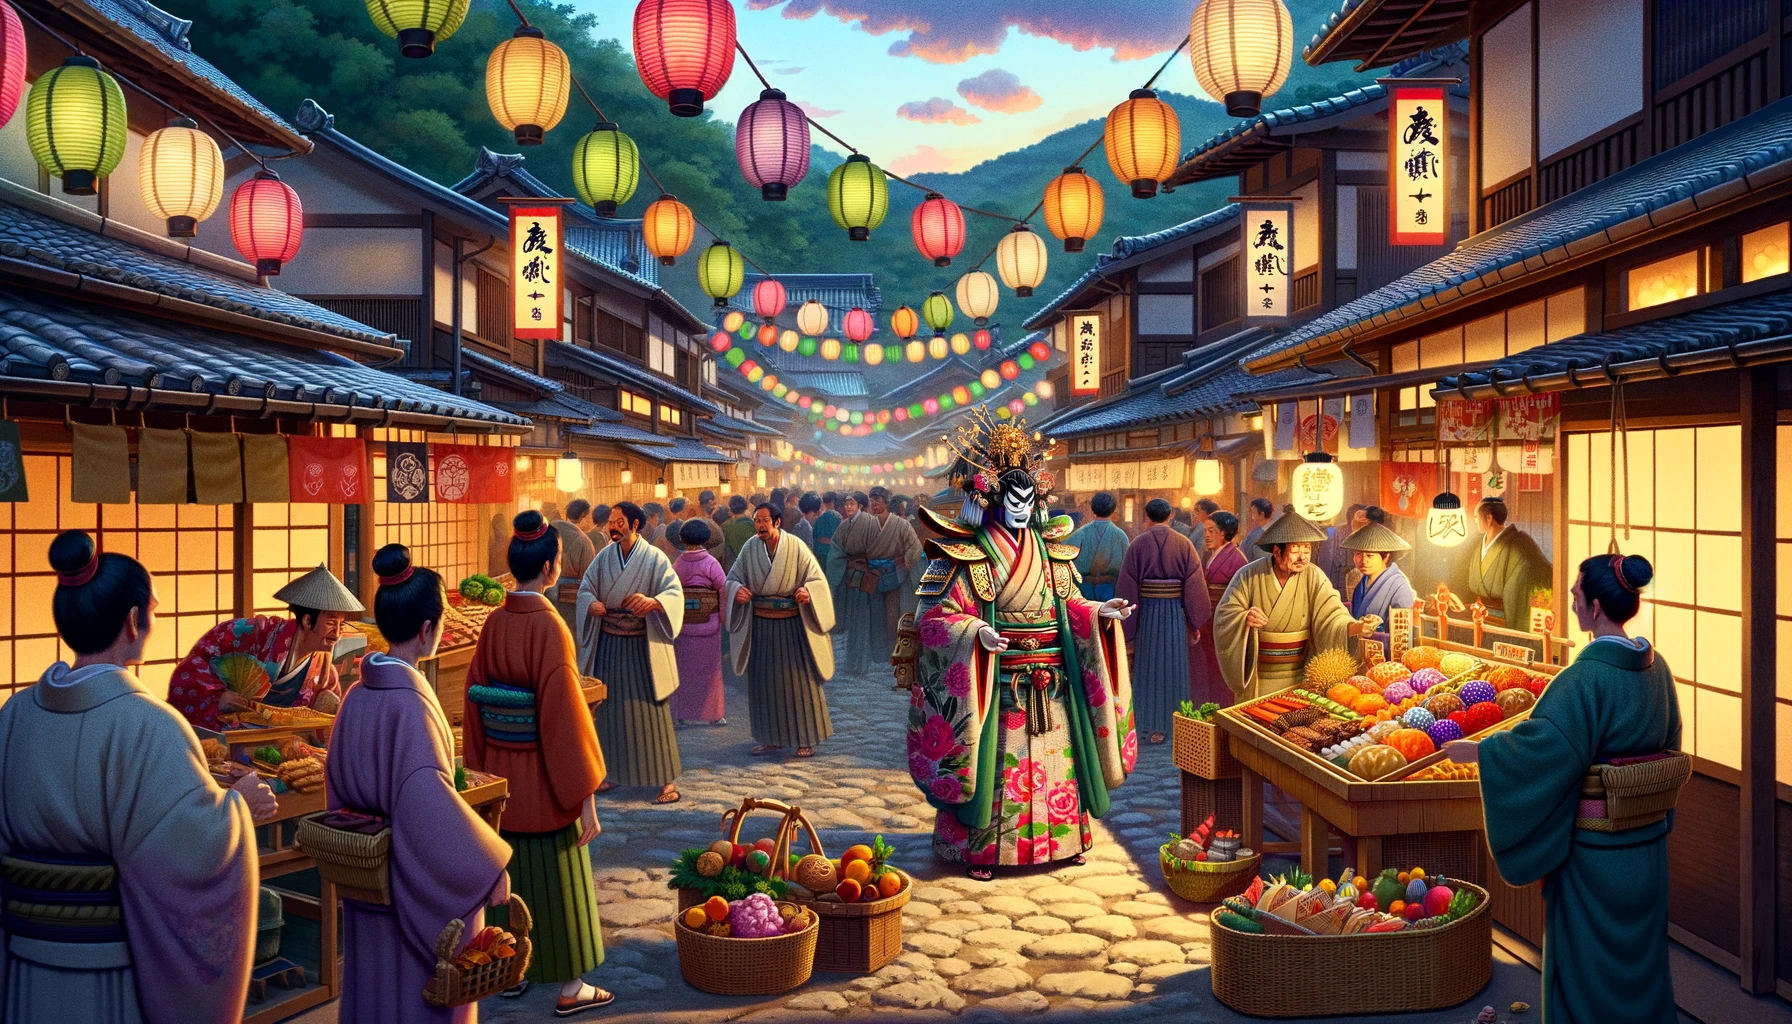 "A vibrant village festival in Feudal Japan. Villagers are dancing, and food stalls line the streets. A kabuki actor, dressed in elaborate costume, stands at the center, seeking help to recover a stolen mask. Colorful lanterns hang above, creating a festive atmosphere."